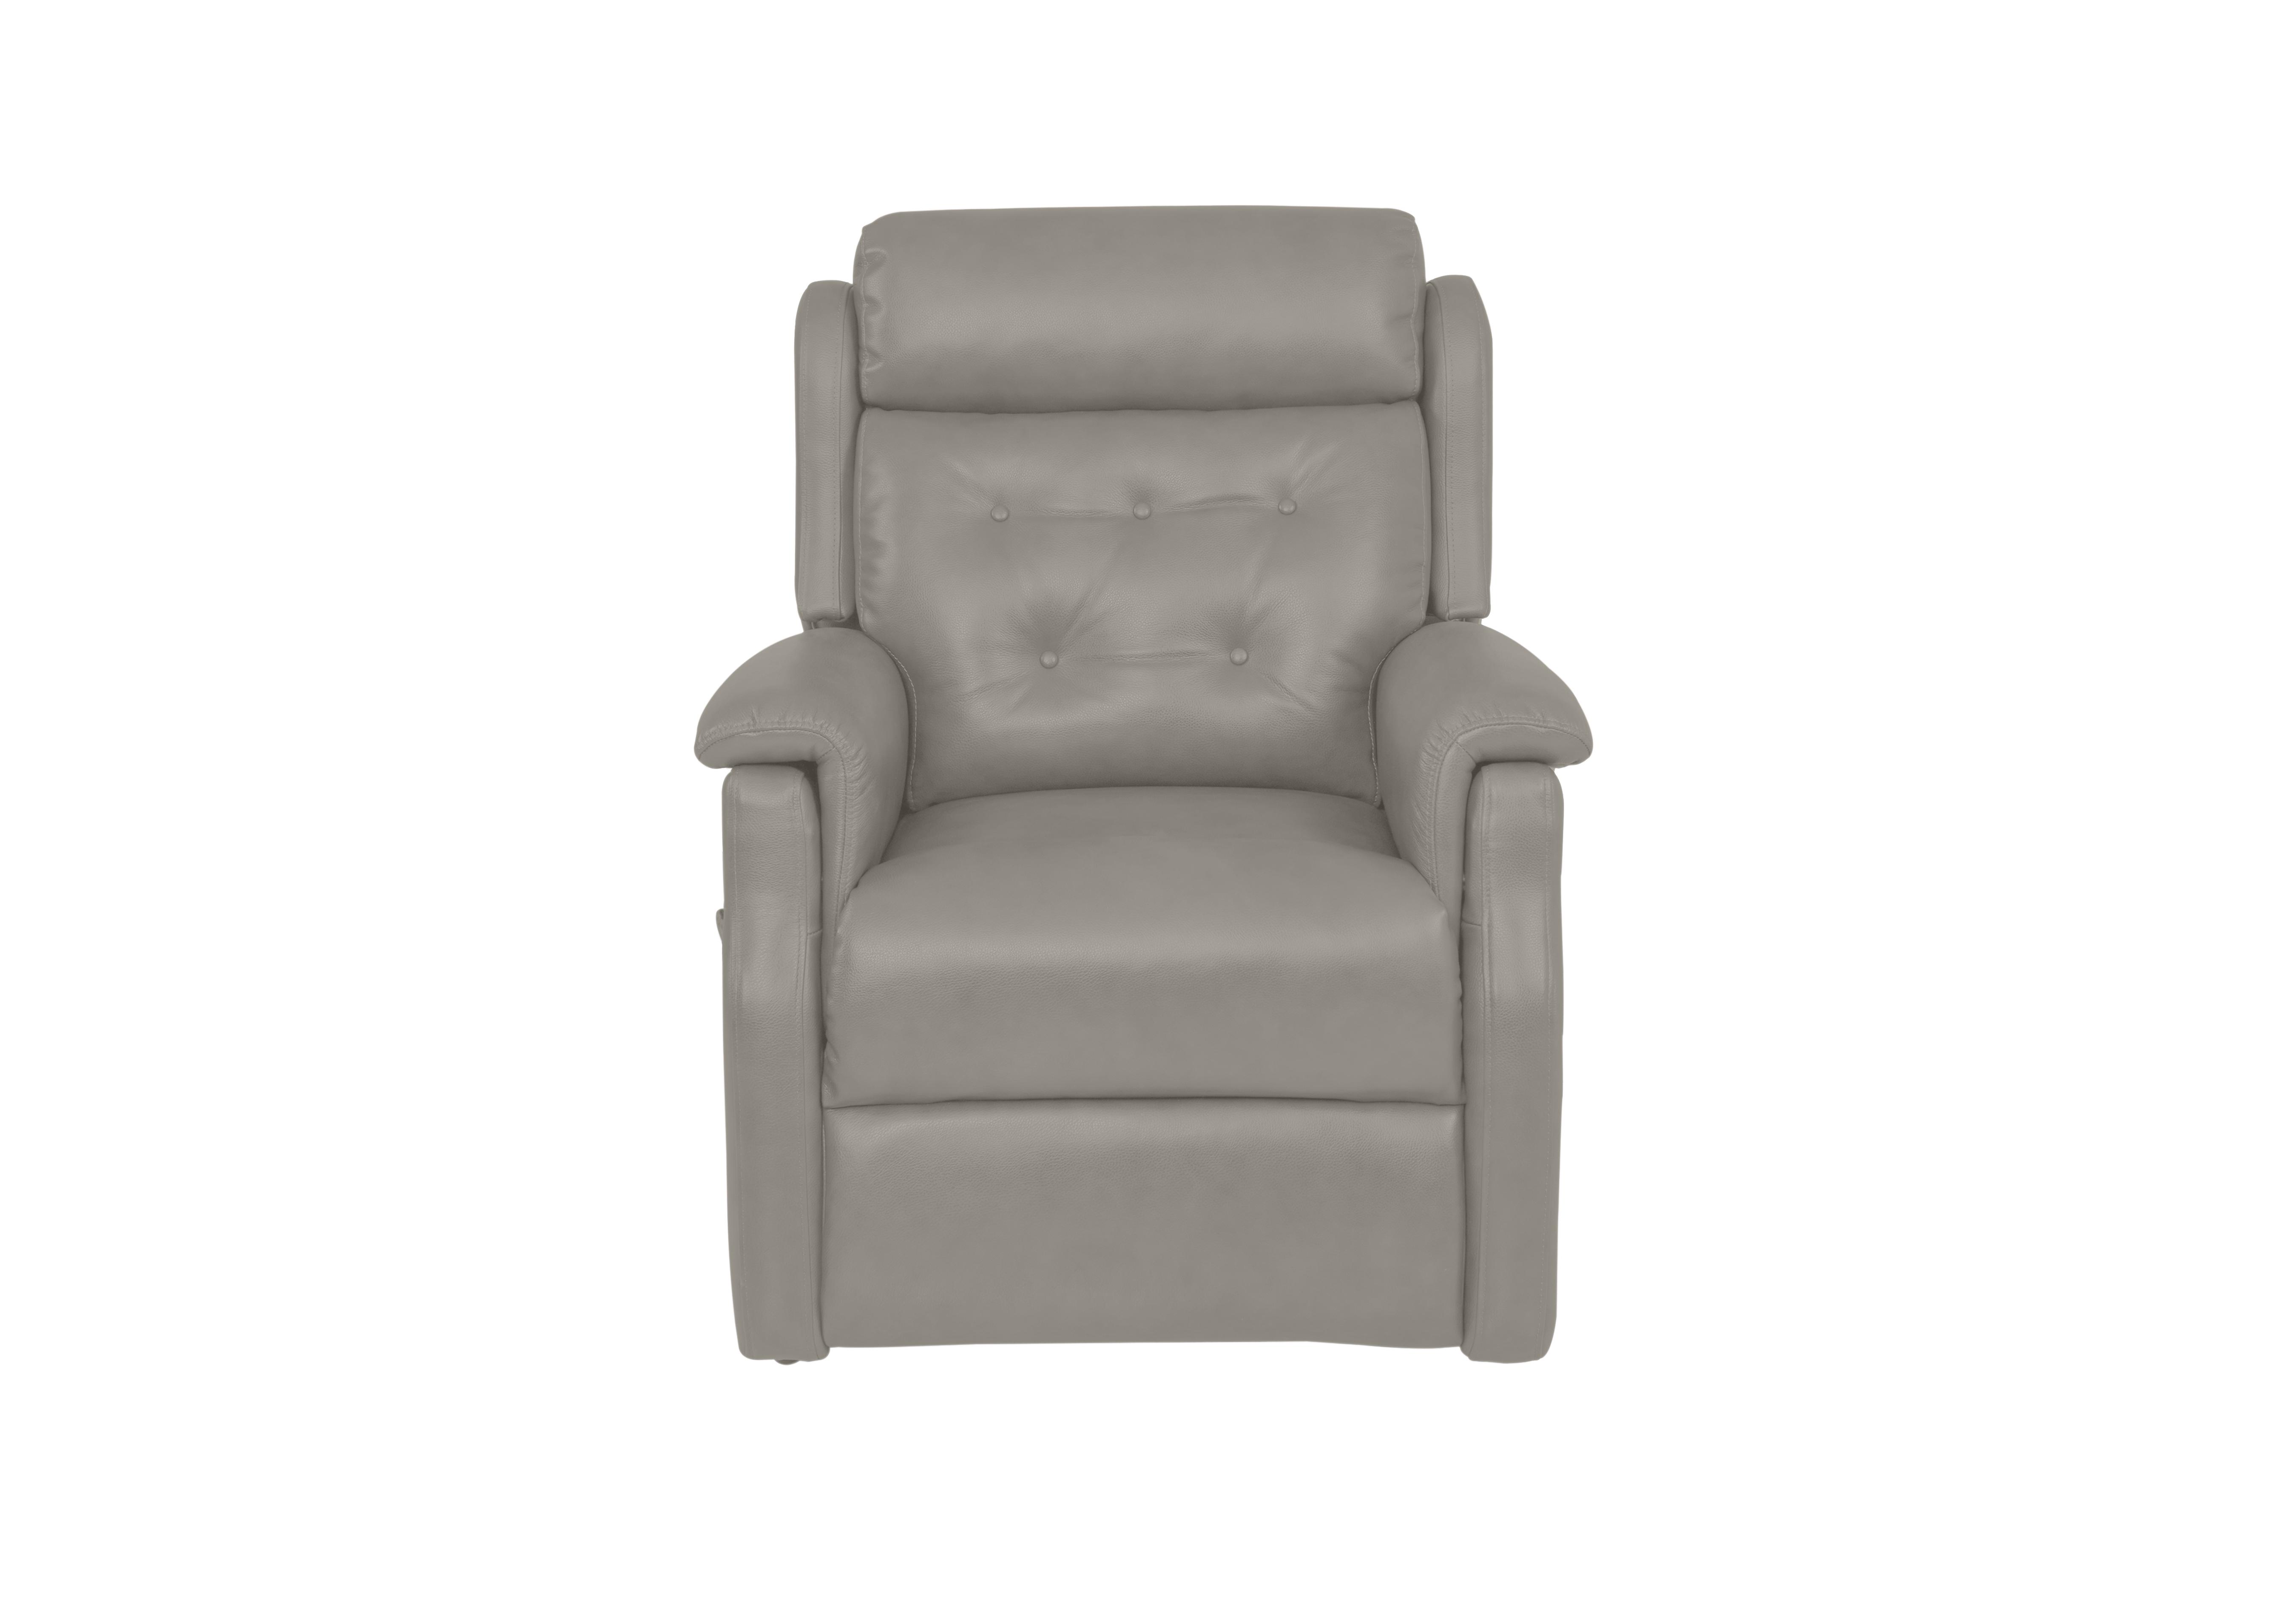 My Chair Scott Leather Lift and Rise Chair in Cat-60/28 Montana New Grey on Furniture Village